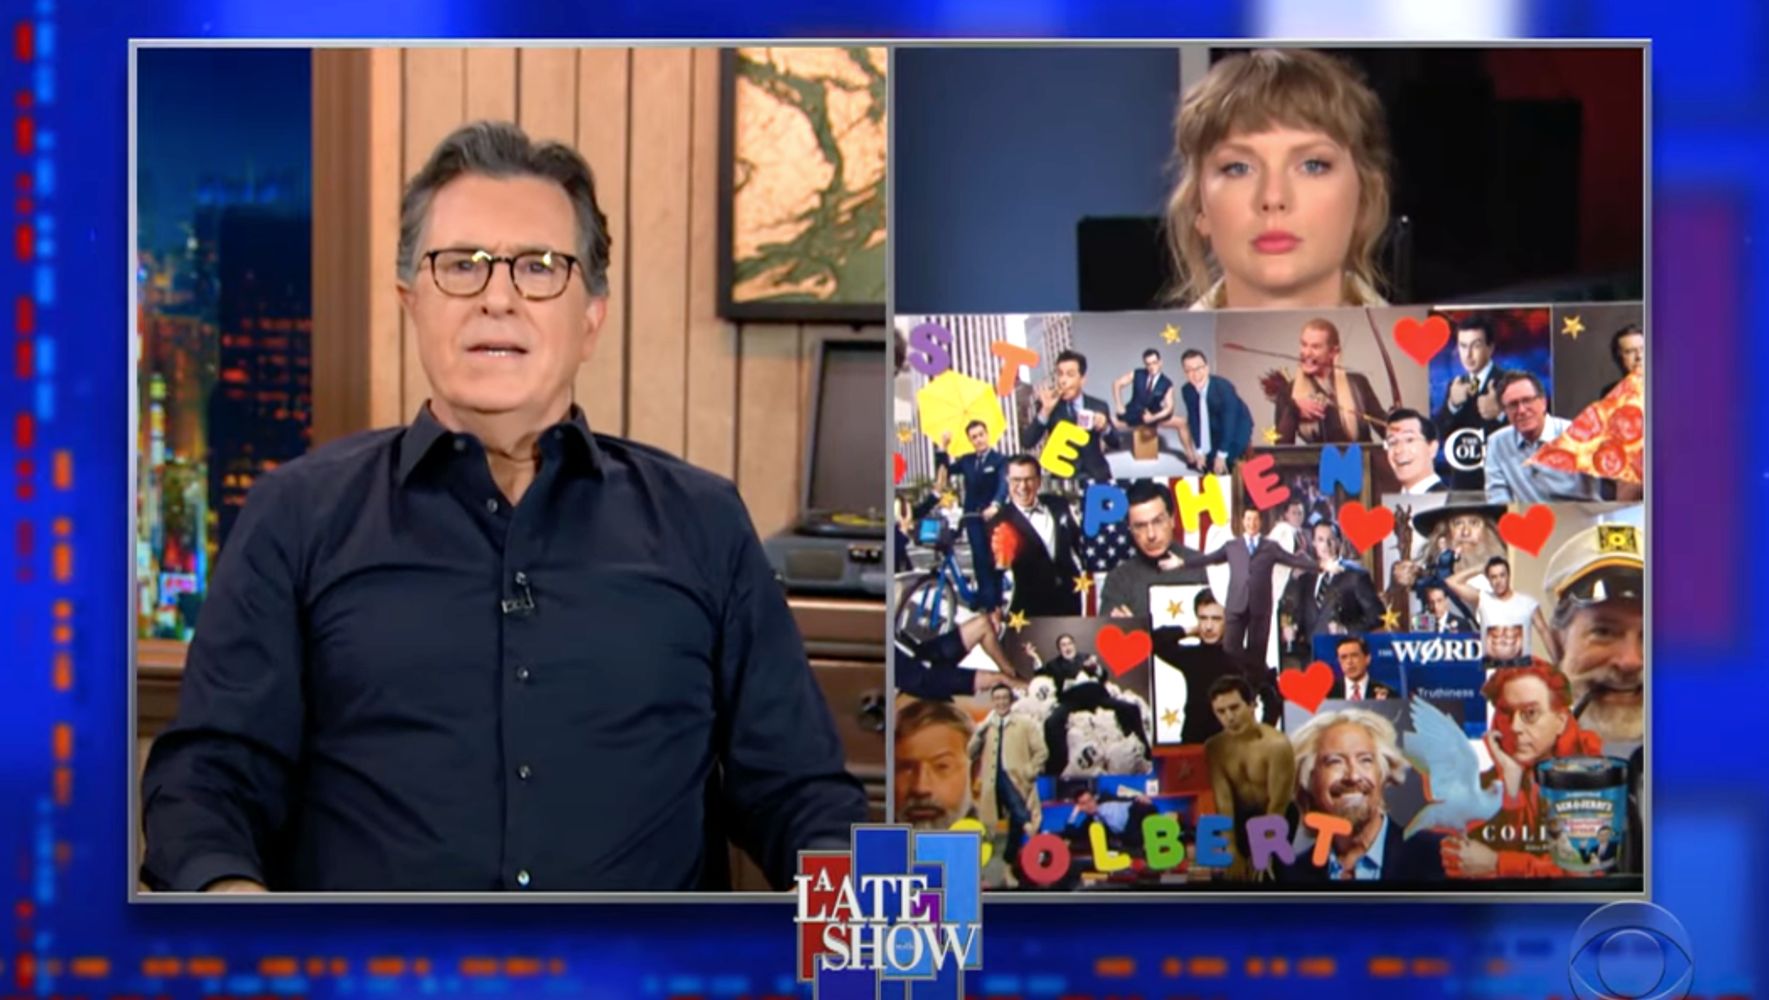 Taylor Swift sneaks on Stephen Colbert during awkward disputes over “Hey Stephen”